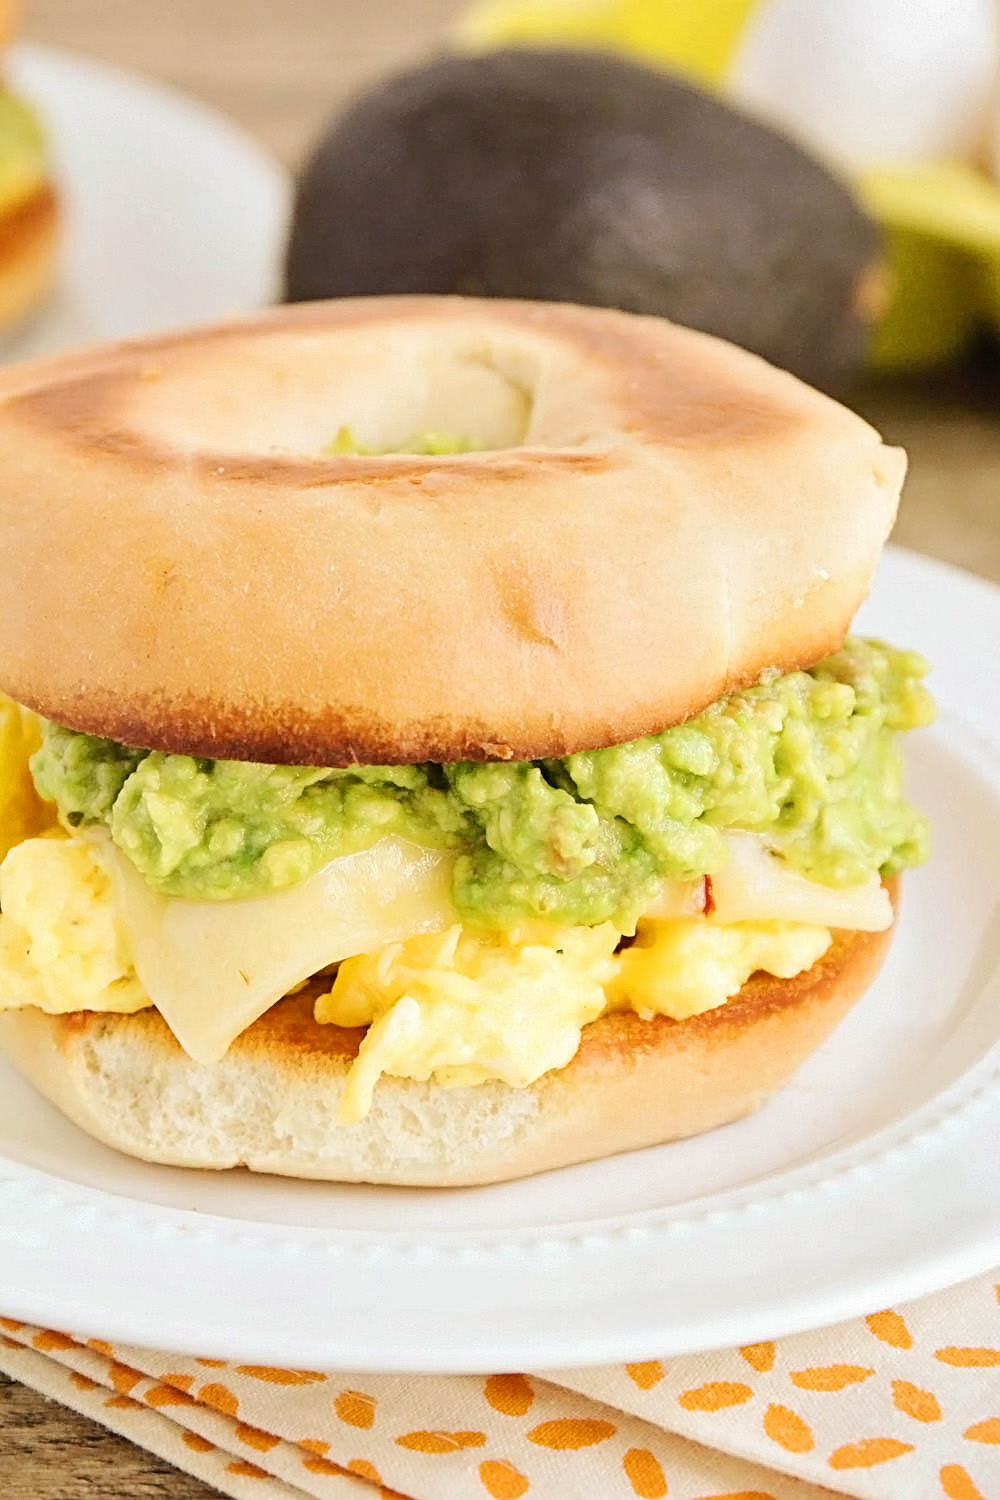 These guacamole and pepper jack breakfast bagels are ready in under 15 minutes and bursting with flavor. The perfect hearty breakfast for a busy day!